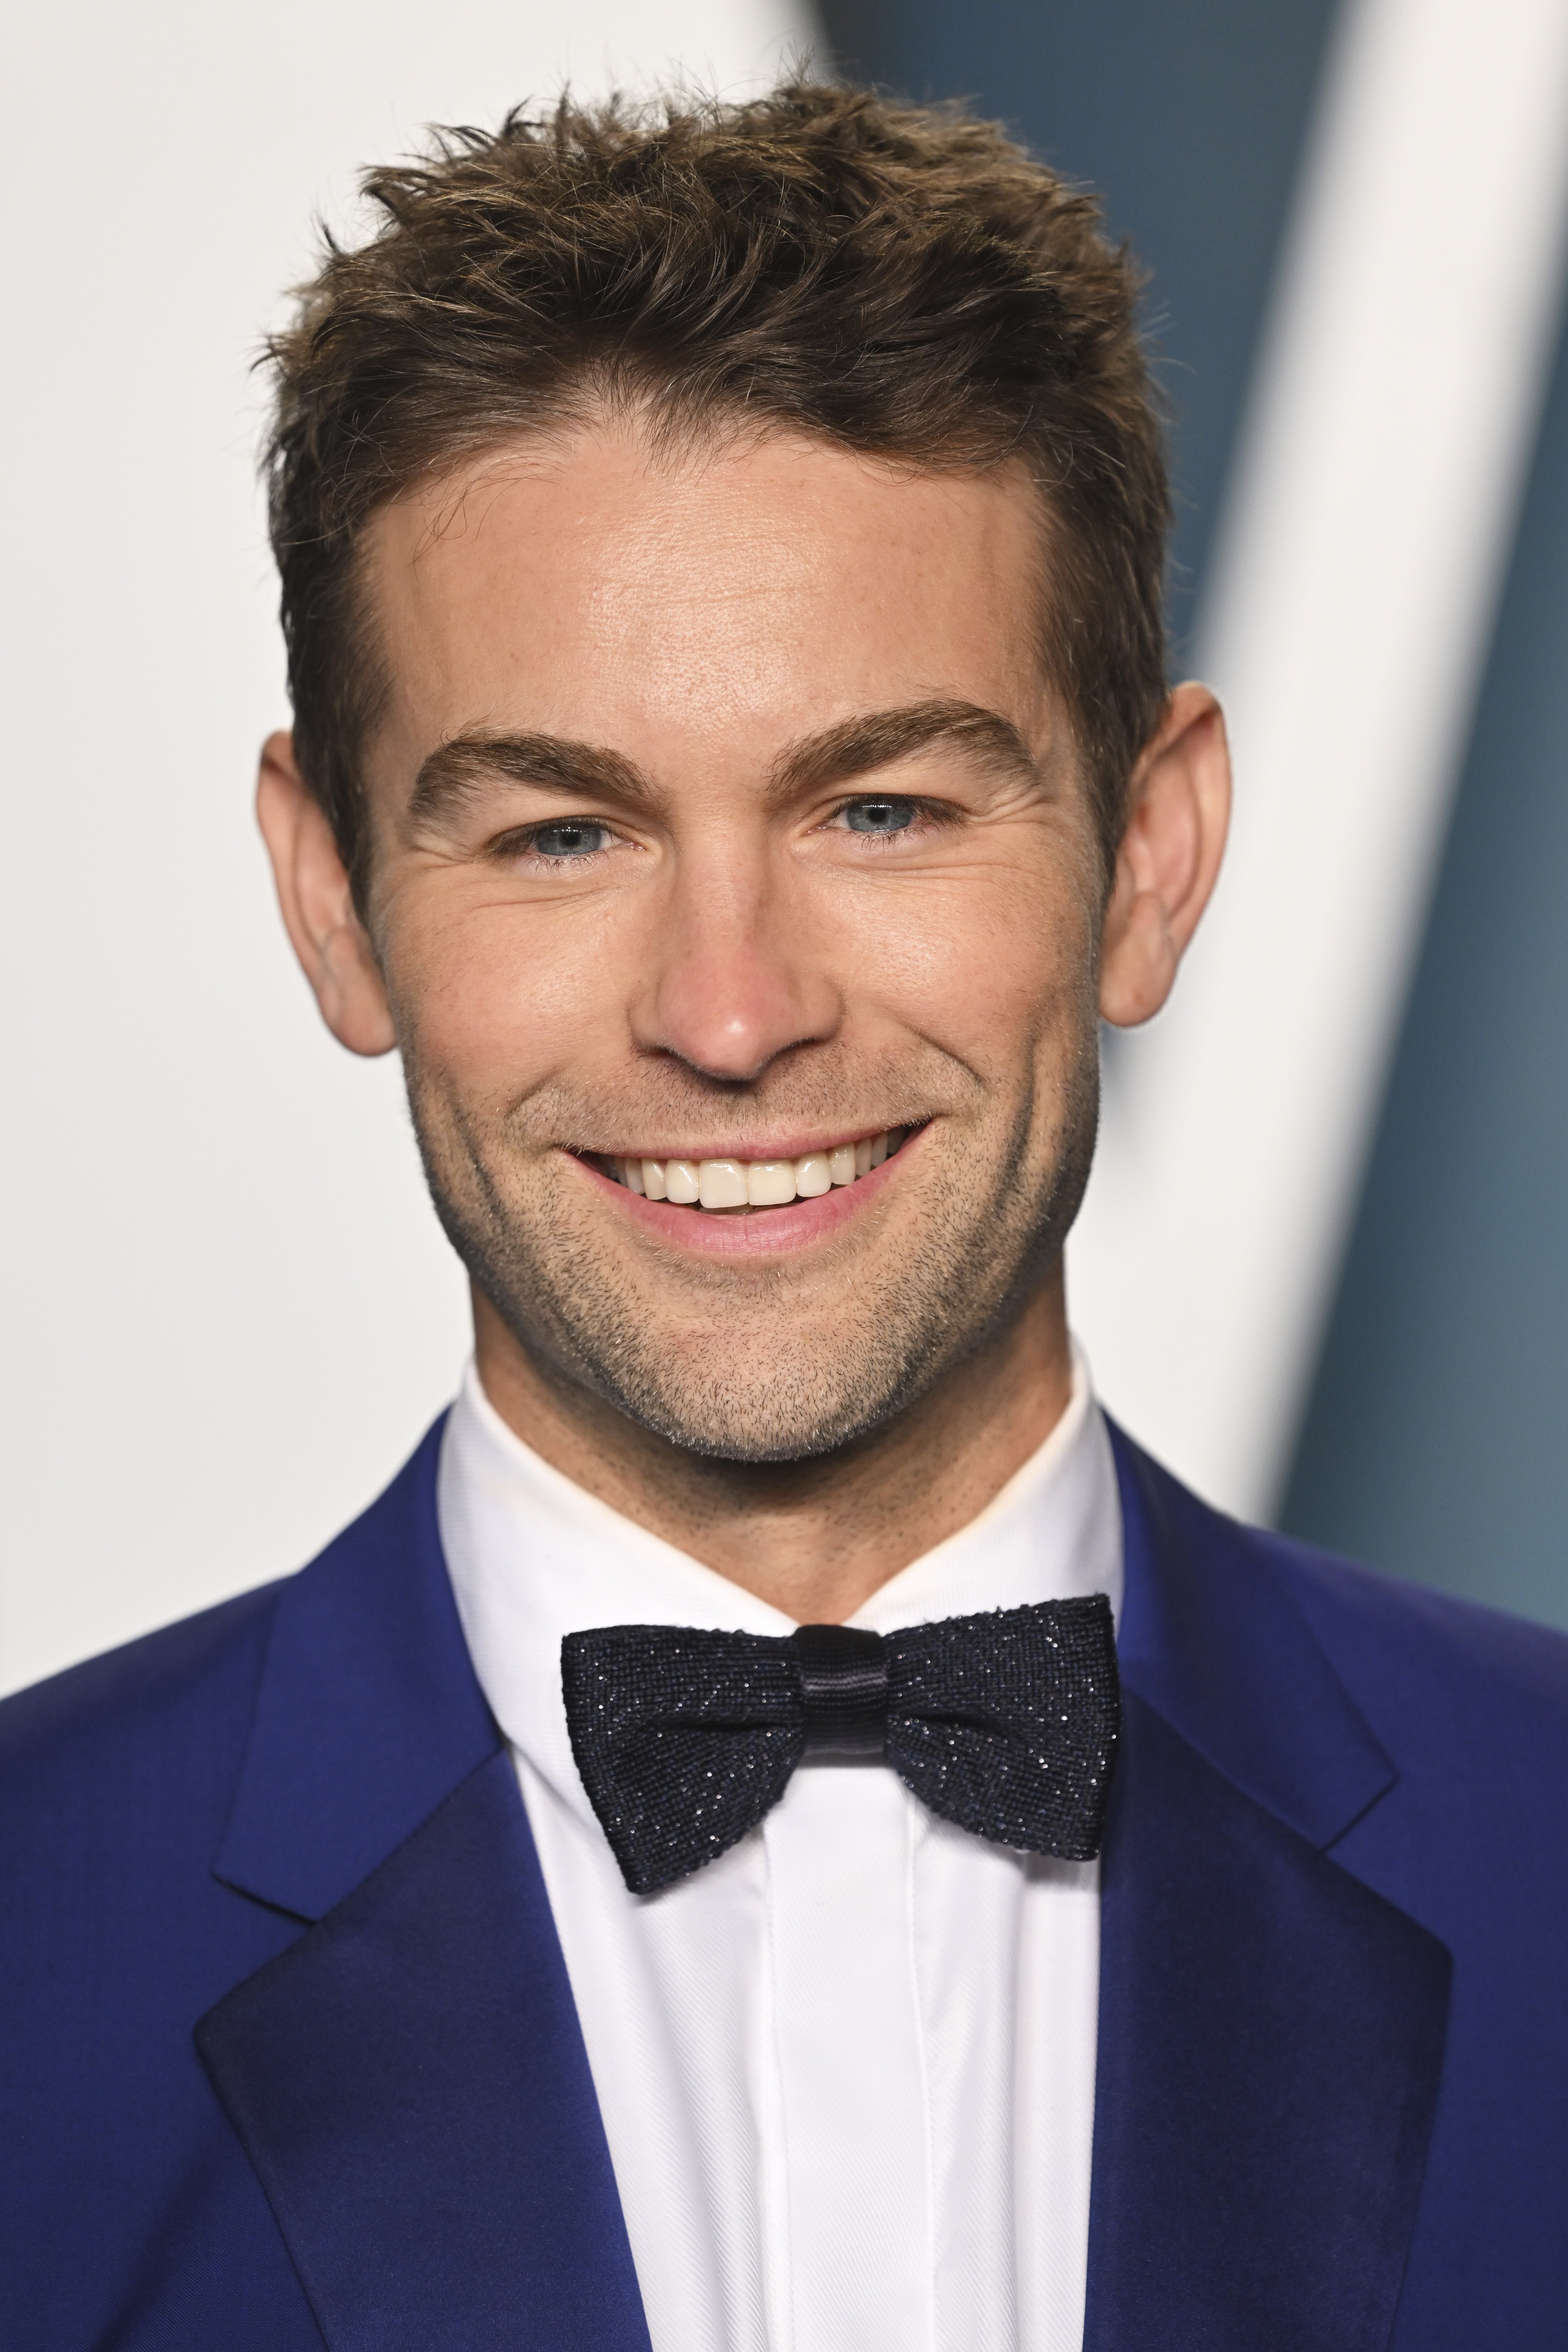 Chace Crawford at the Vanity Fair Oscar Party on March 27, 2022 | Source: Getty Images